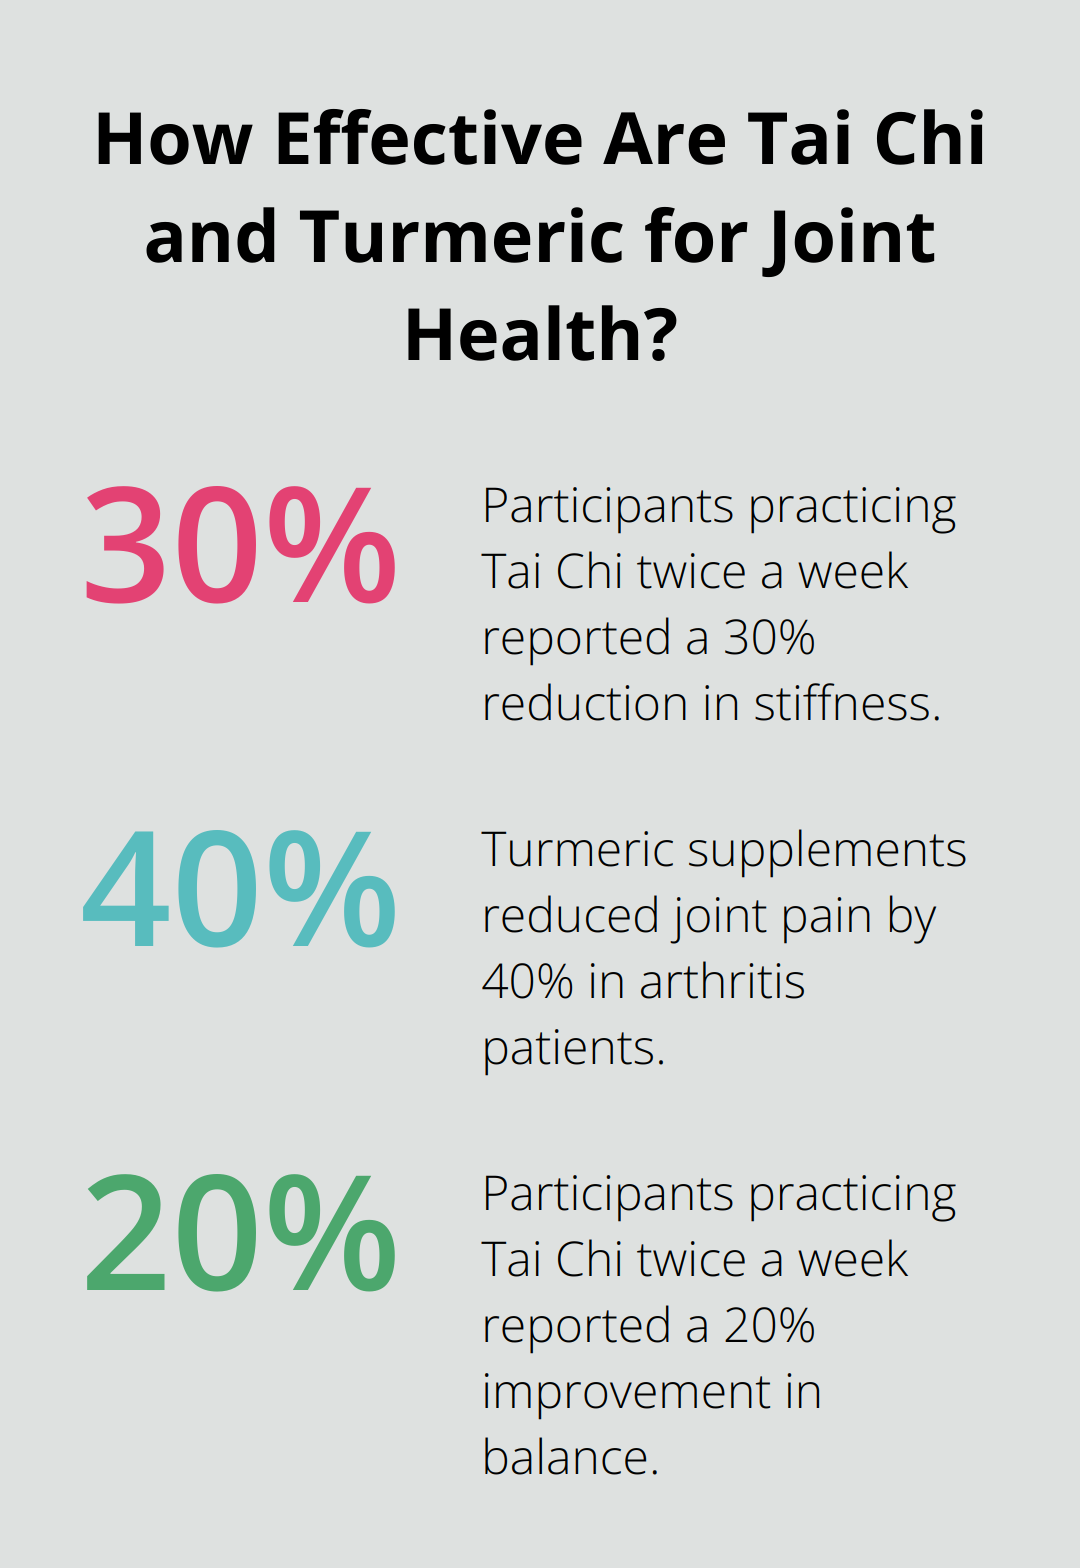 Fact - How Effective Are Tai Chi and Turmeric for Joint Health?